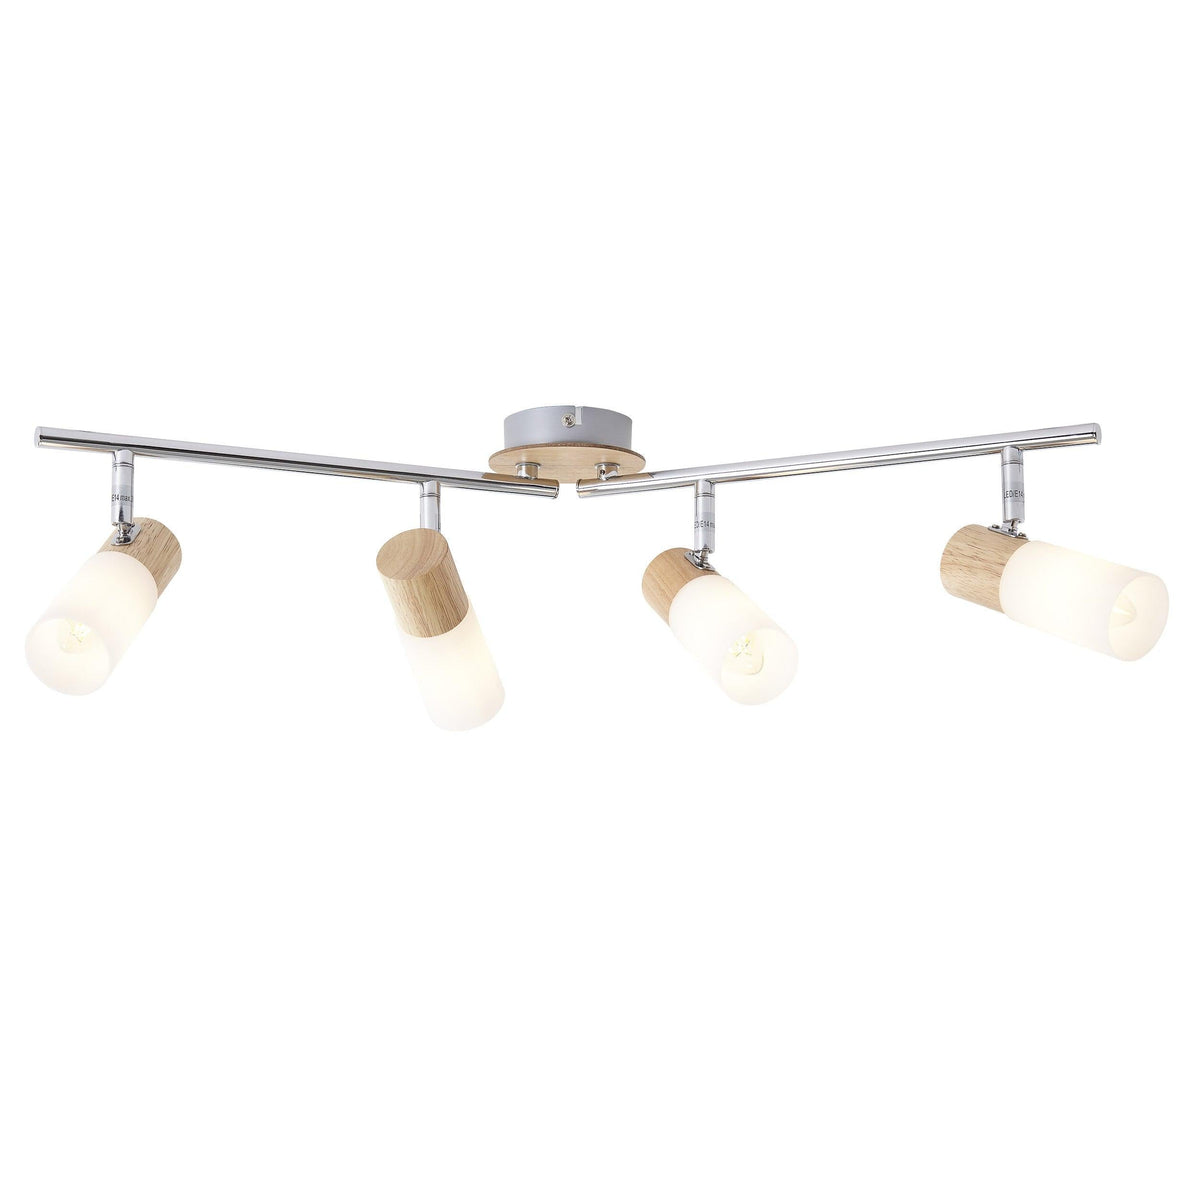 Brilliant 4 Light 14W Babsan Spotlight - Wood Light &amp; White | 51432/50 from DID Electrical - guaranteed Irish, guaranteed quality service. (6977595048124)